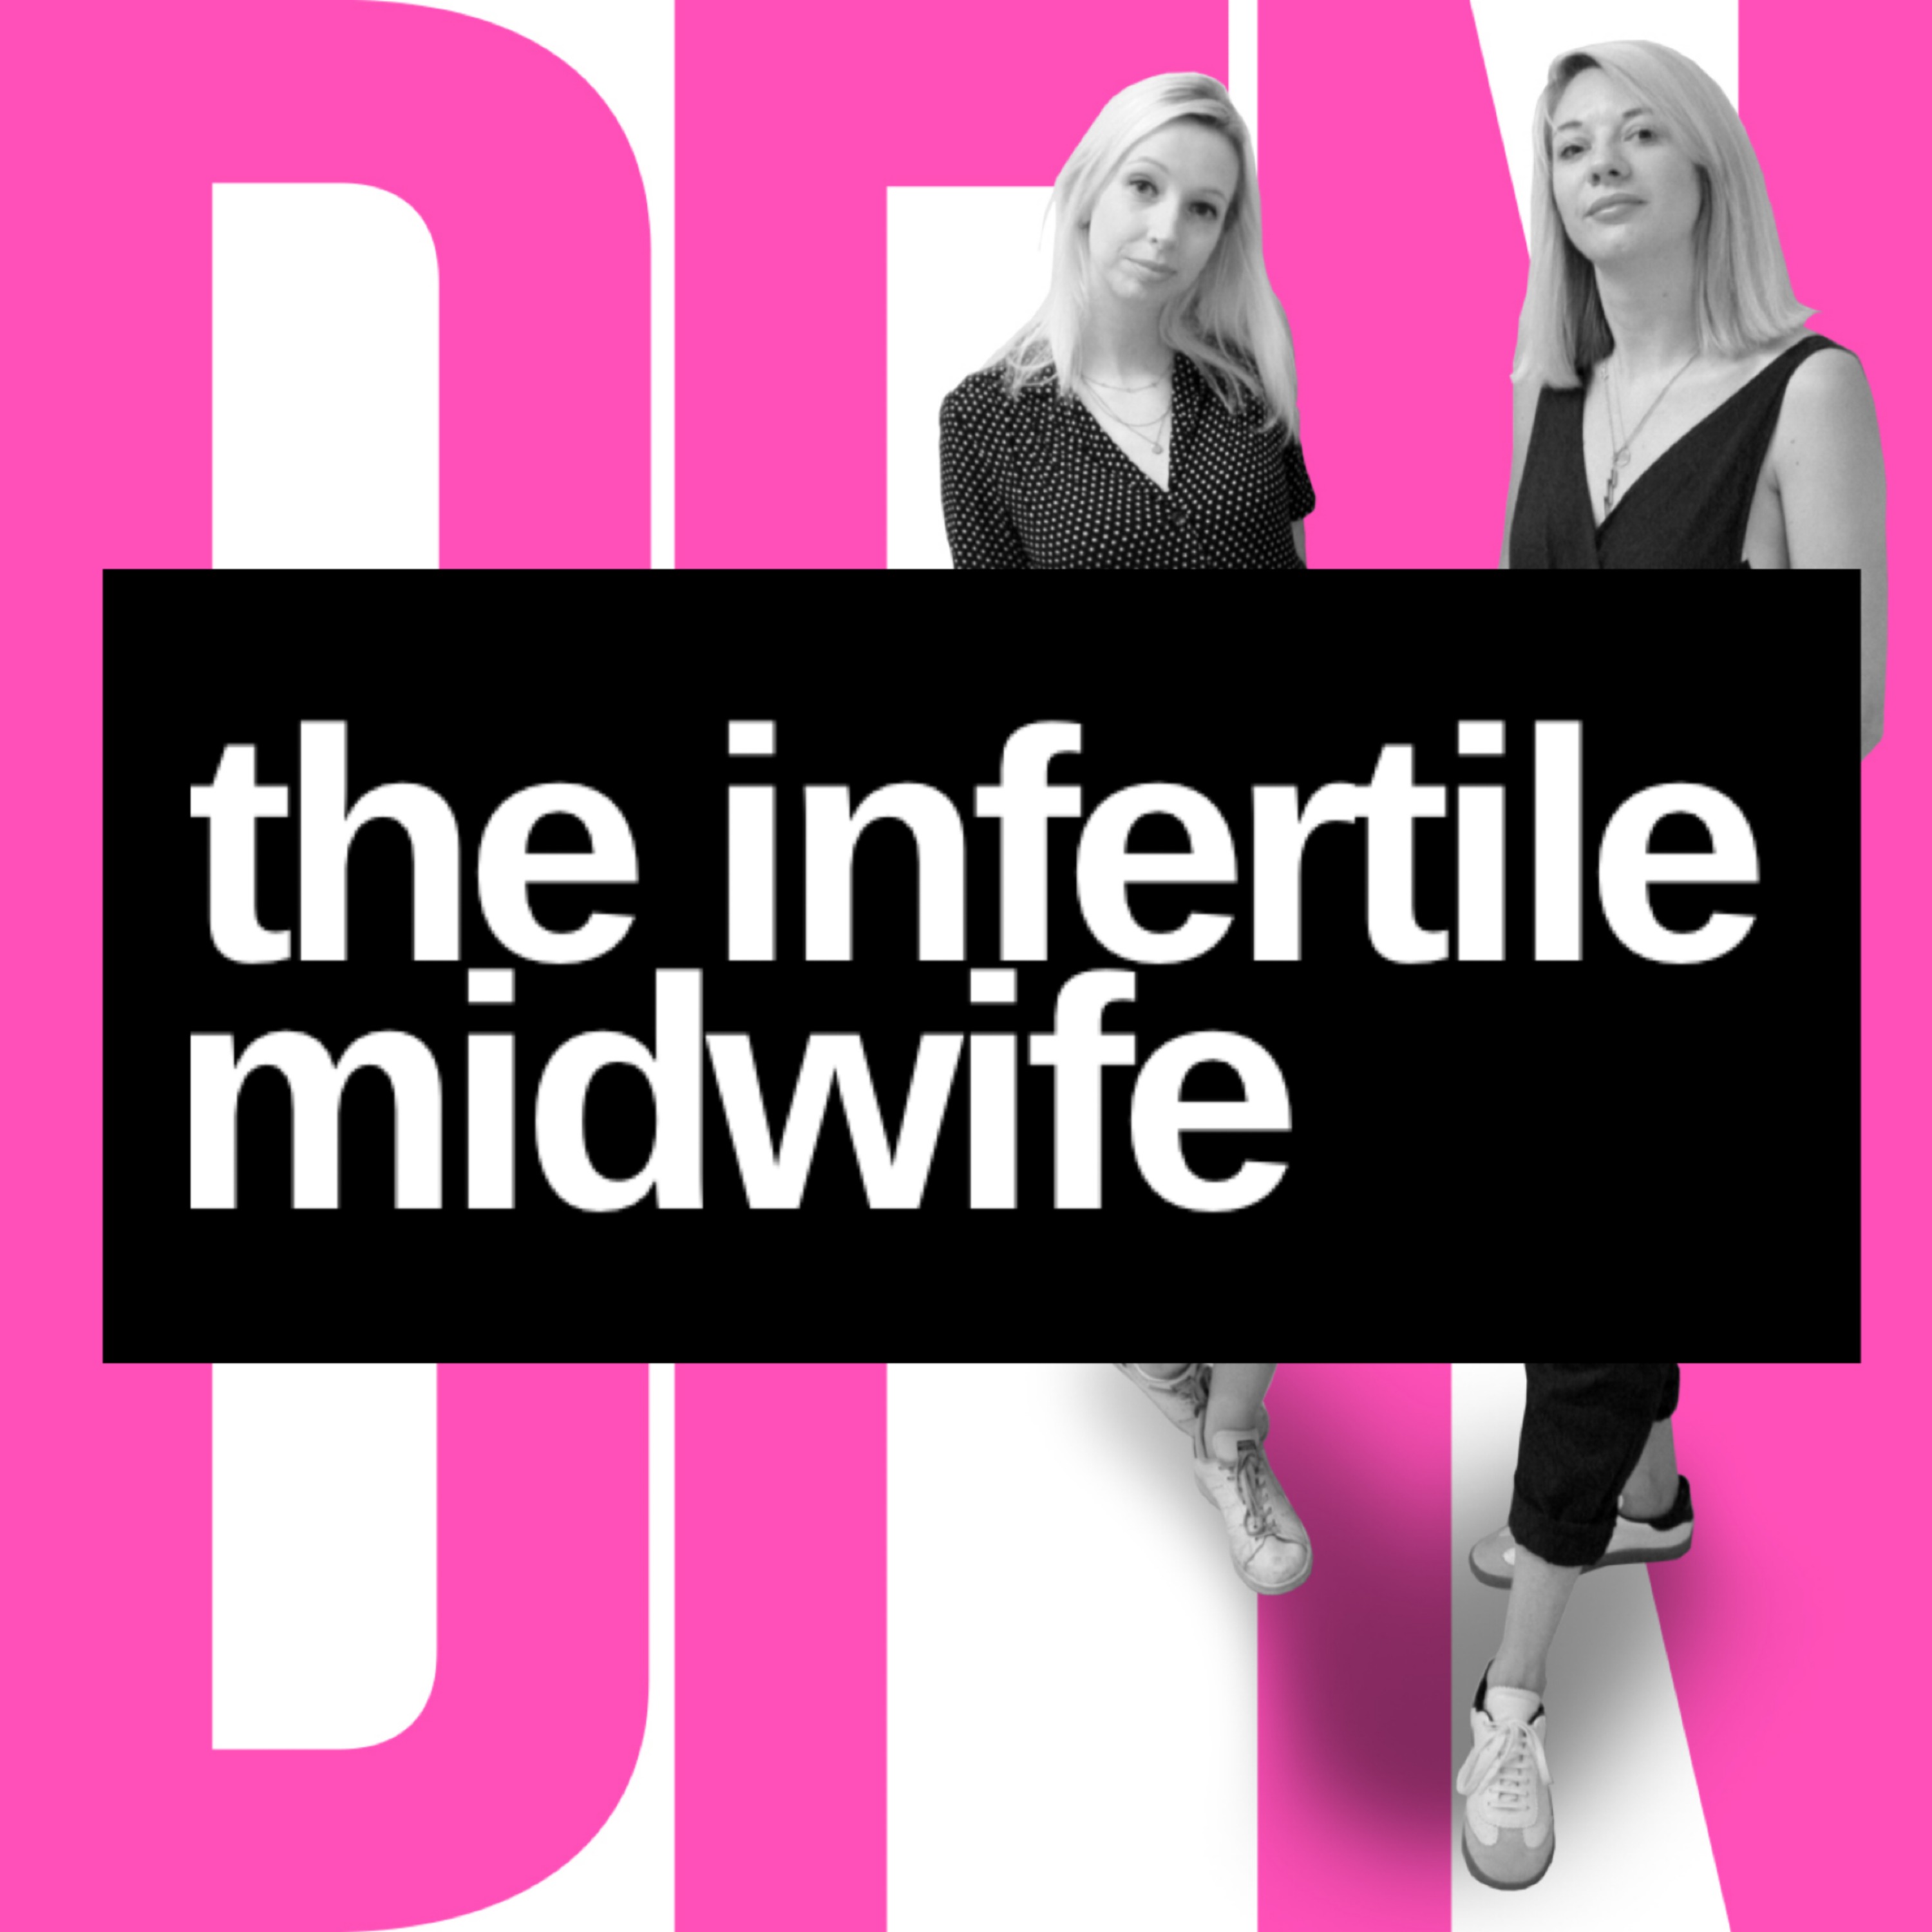 The infertile midwife